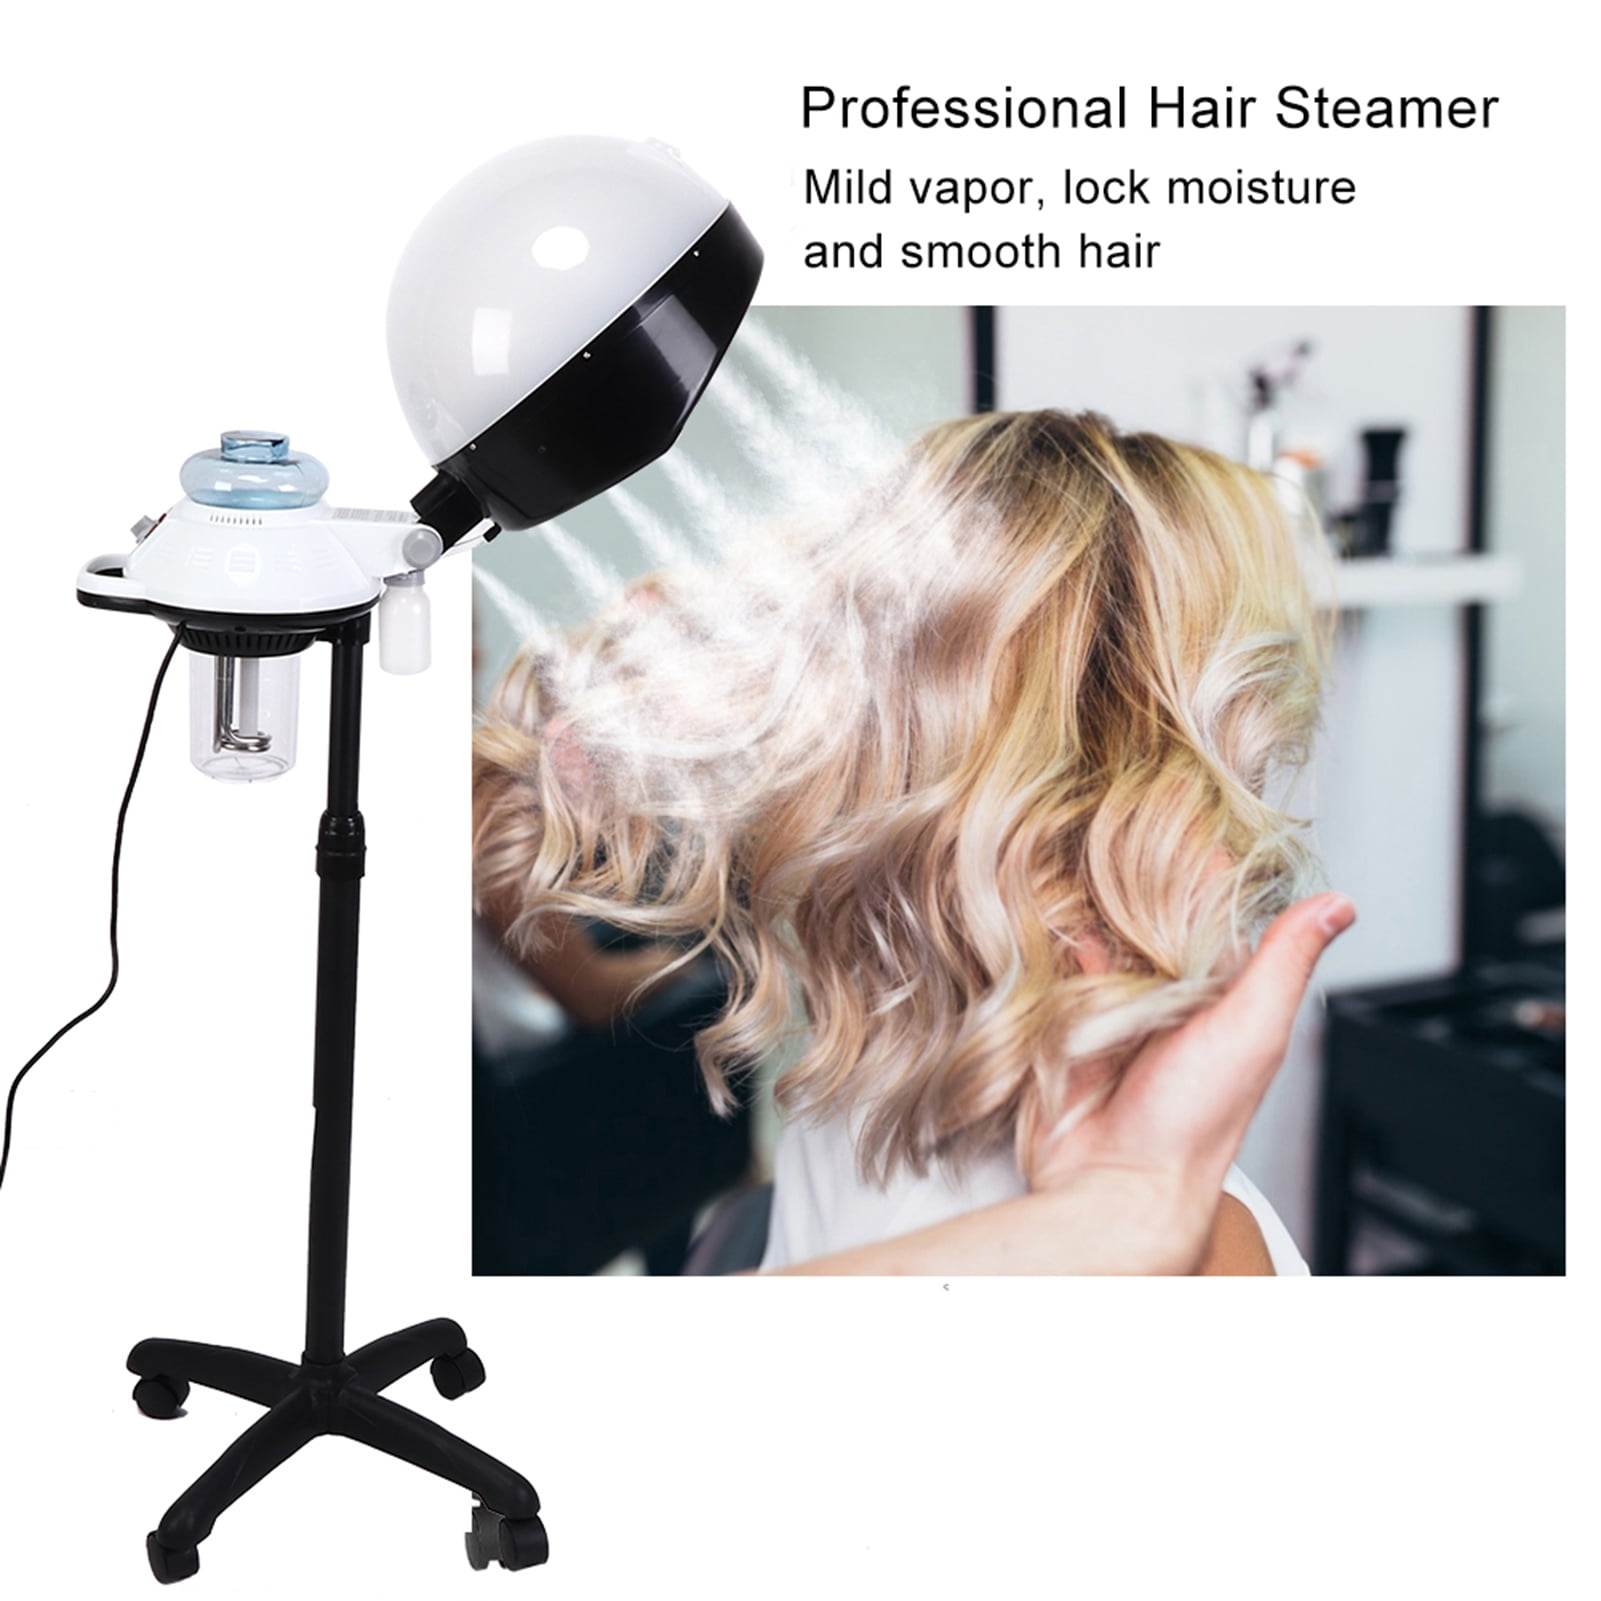  QQXX Professional Standing Hair Dryer,freestanding Hair Color  Processor Height Adjustable,Hair Steamer with Smooth Wheels,Salon Hooded Hair  Dryers Perming Machine for Beauty Spa Home Salon Equipment : Beauty &  Personal Care